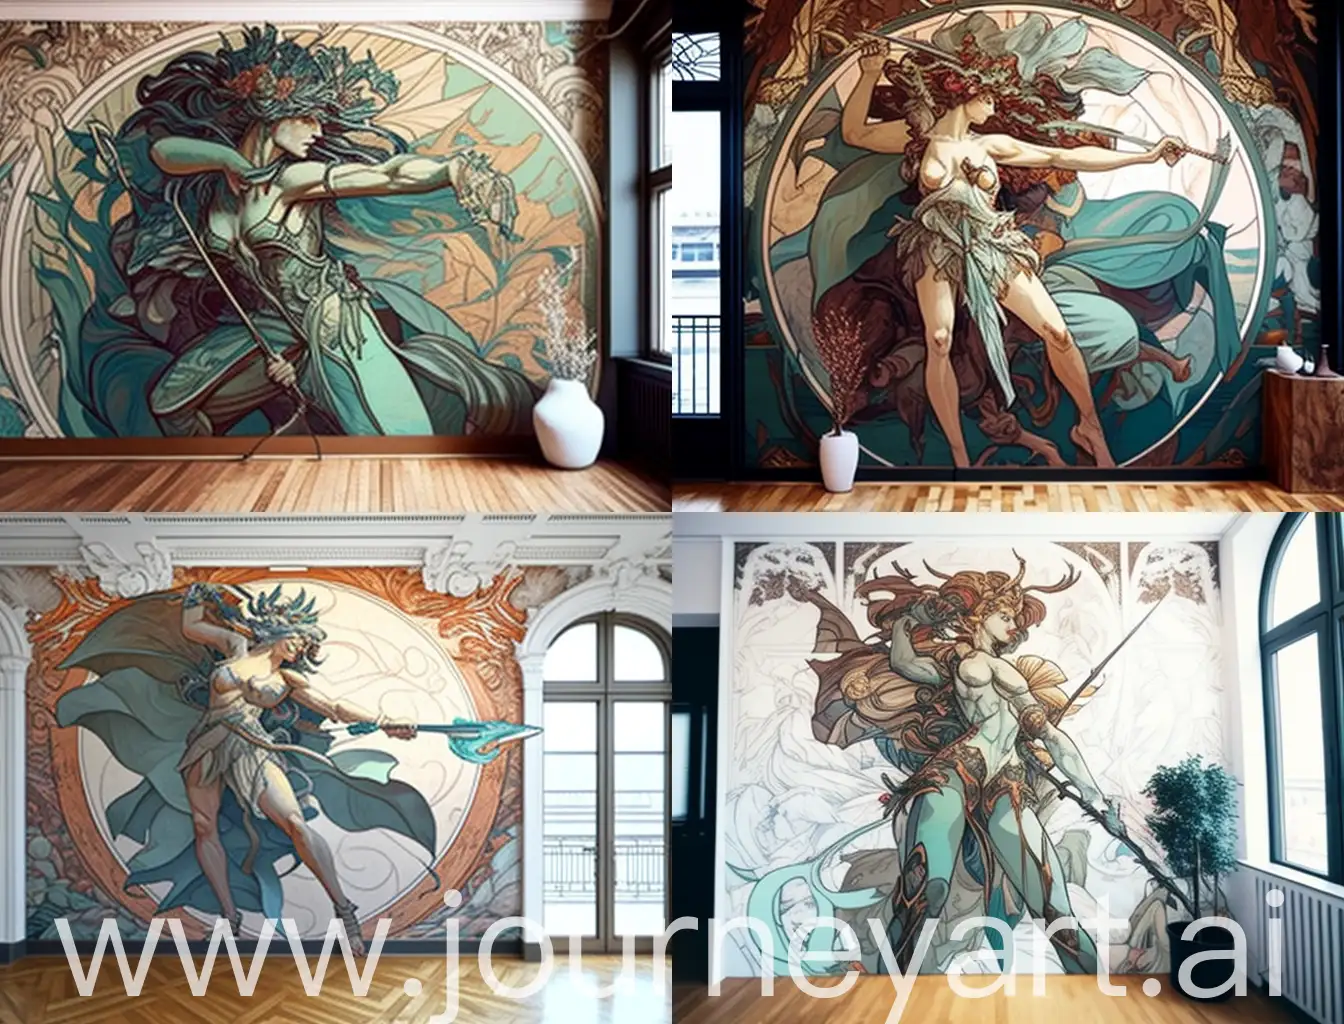 the mural on the wall. art nouveau, Alphonse mucha. Fight scene warrior in armor with a spear against a monster, texture